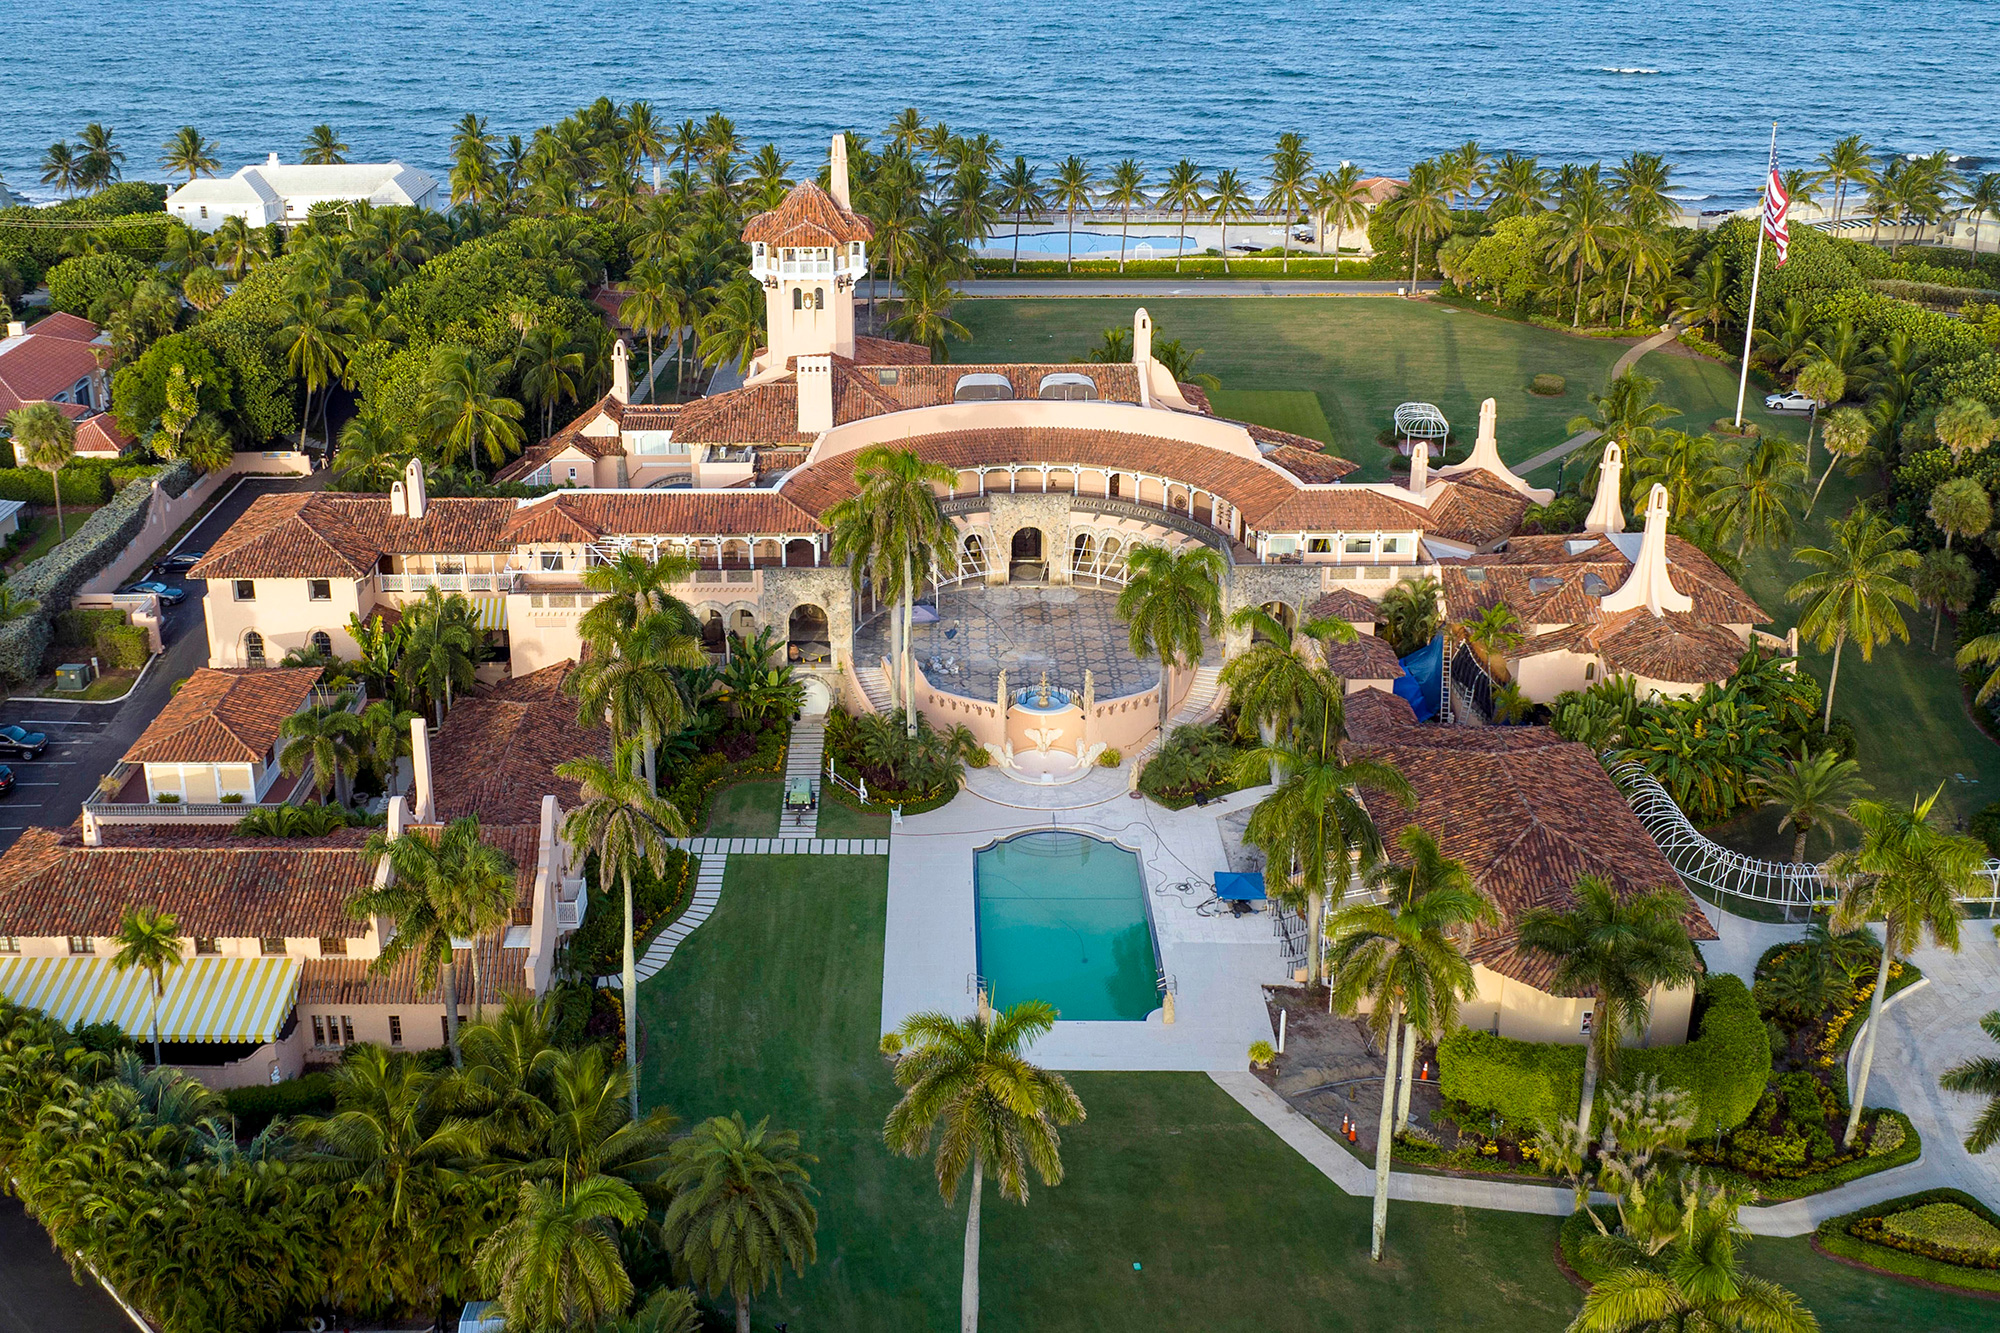 An aerial view of Donald Trump's Mar-a-Lago estate in Palm Beach, Florida, in August 2022.